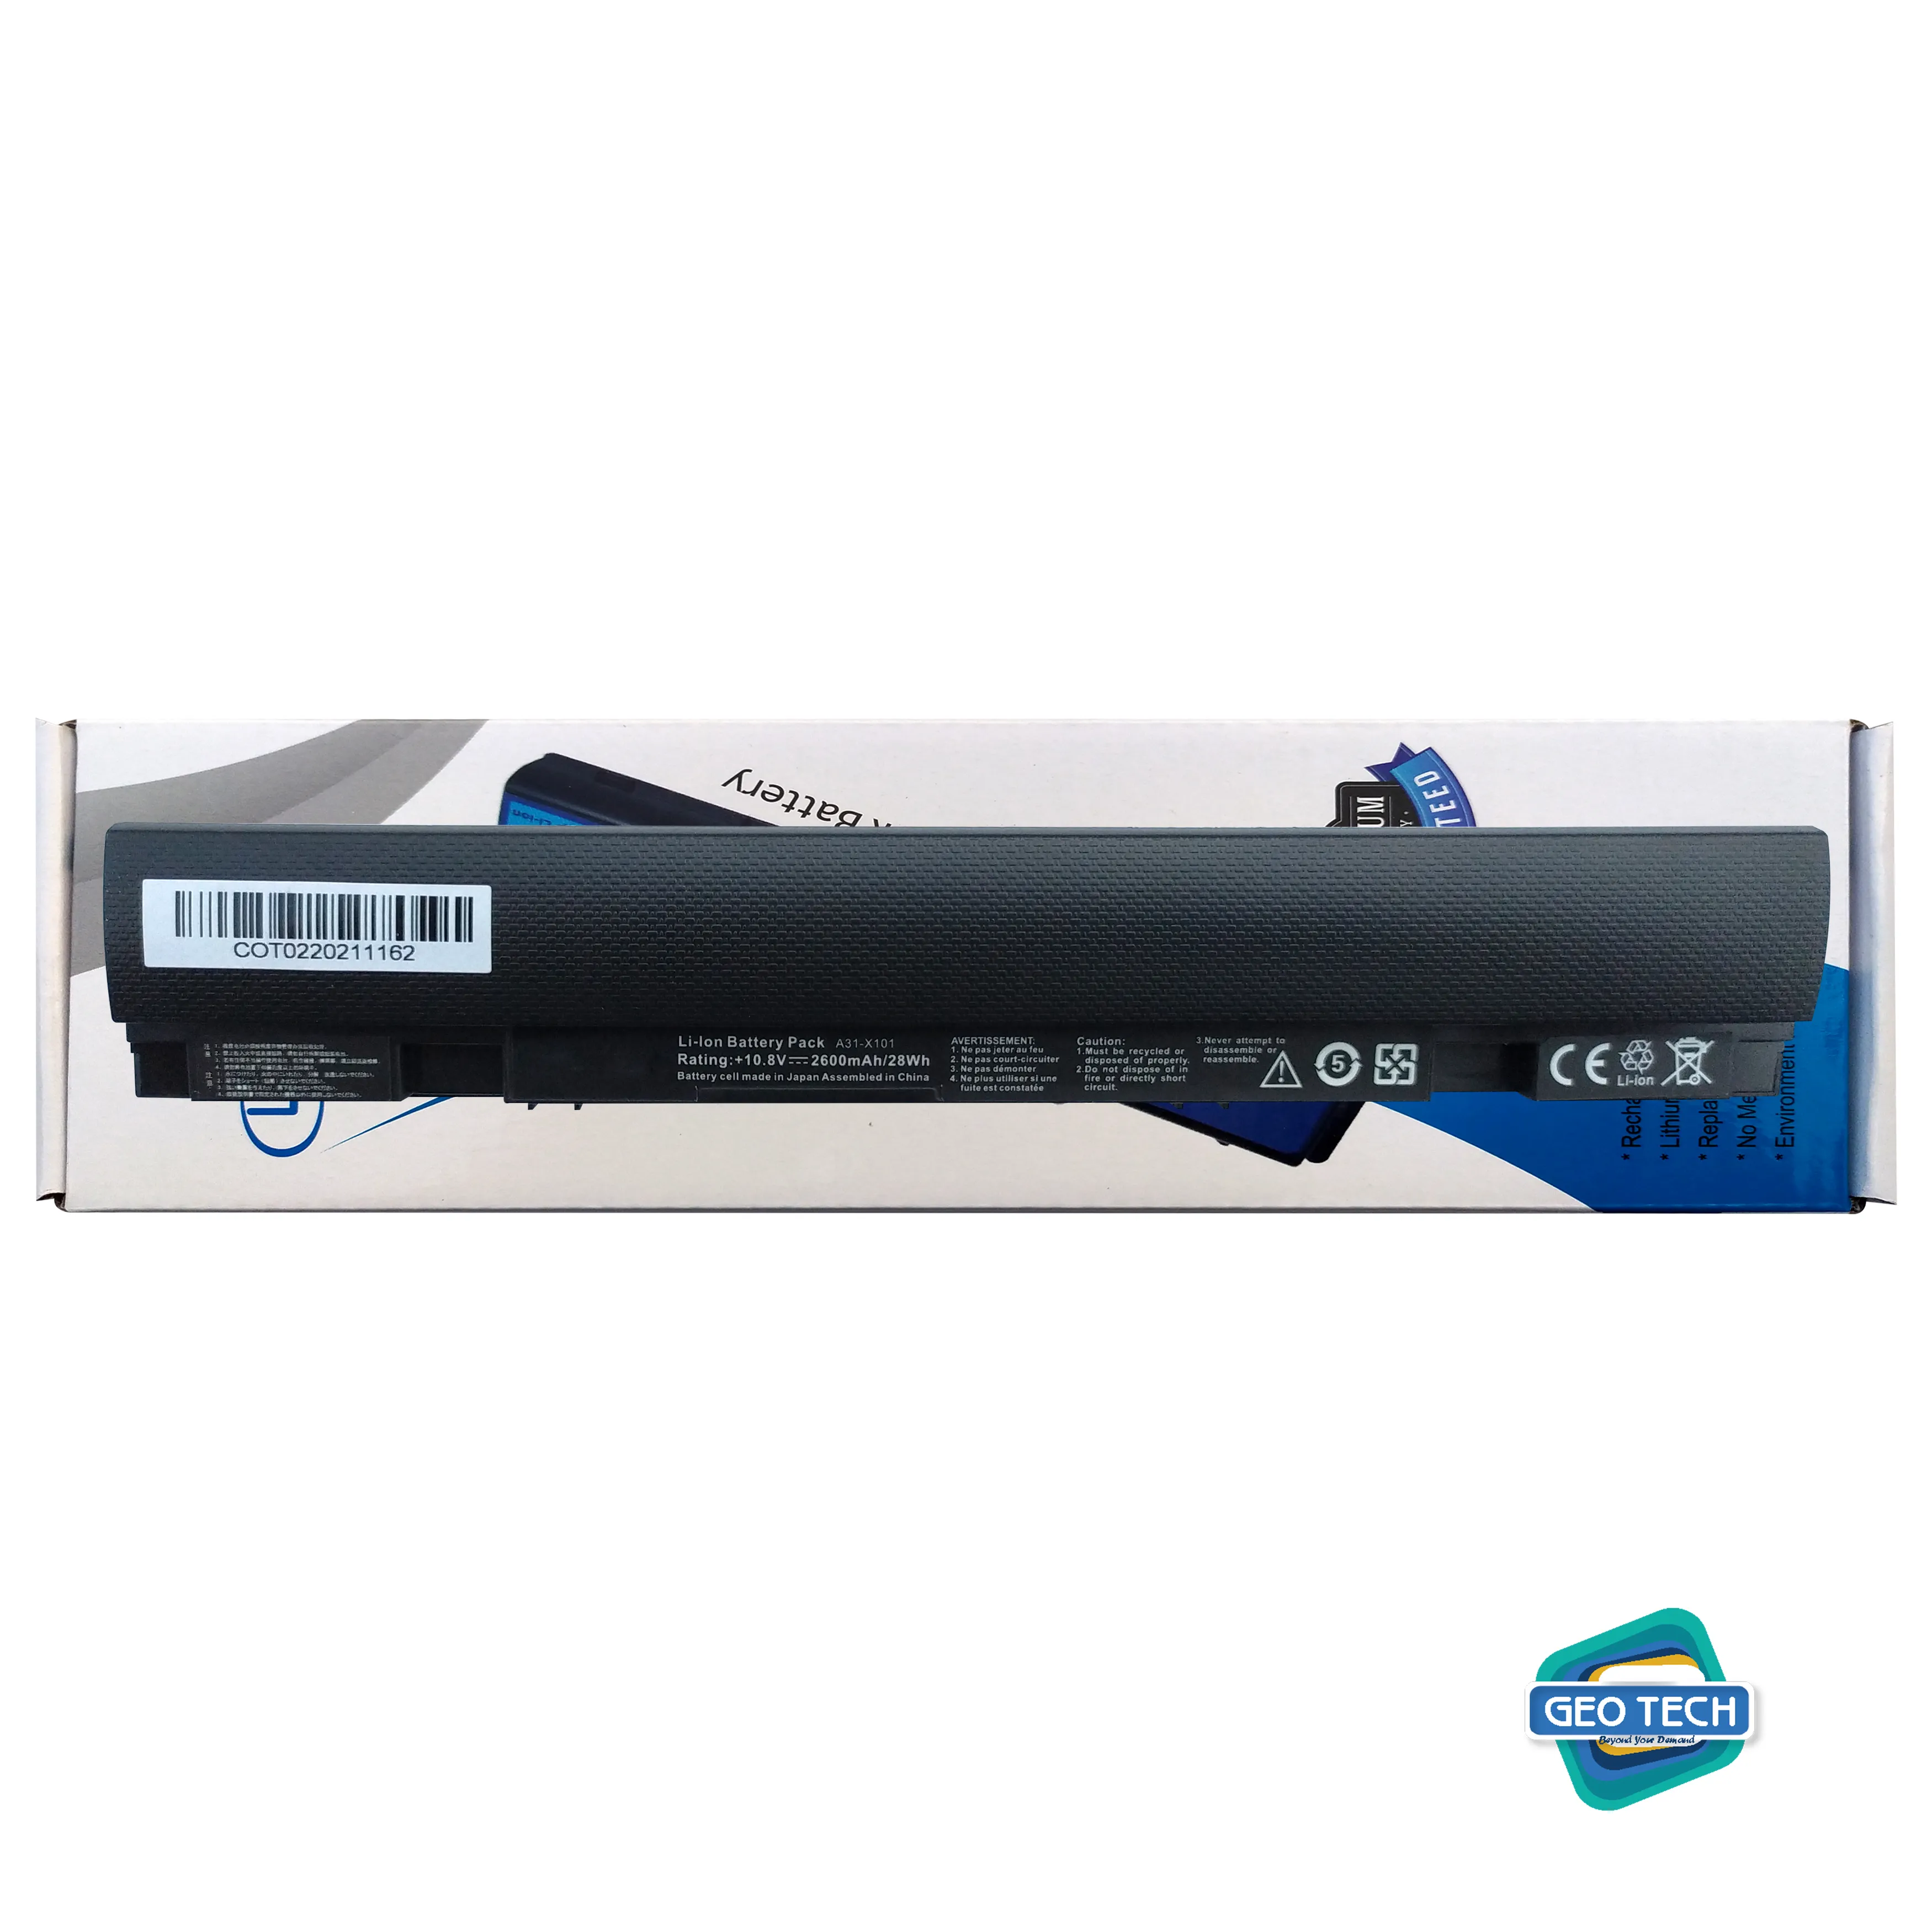 Laptop Battery Asus X101ch/ ASUS Eee PC X101, Eee PC X101C, Eee PC X101CH, Eee PC X101H Part NO 0B110-00100000M-A1A1A-213-AJ1B, 0B20-013K0AS, A31-X101 BATTERY